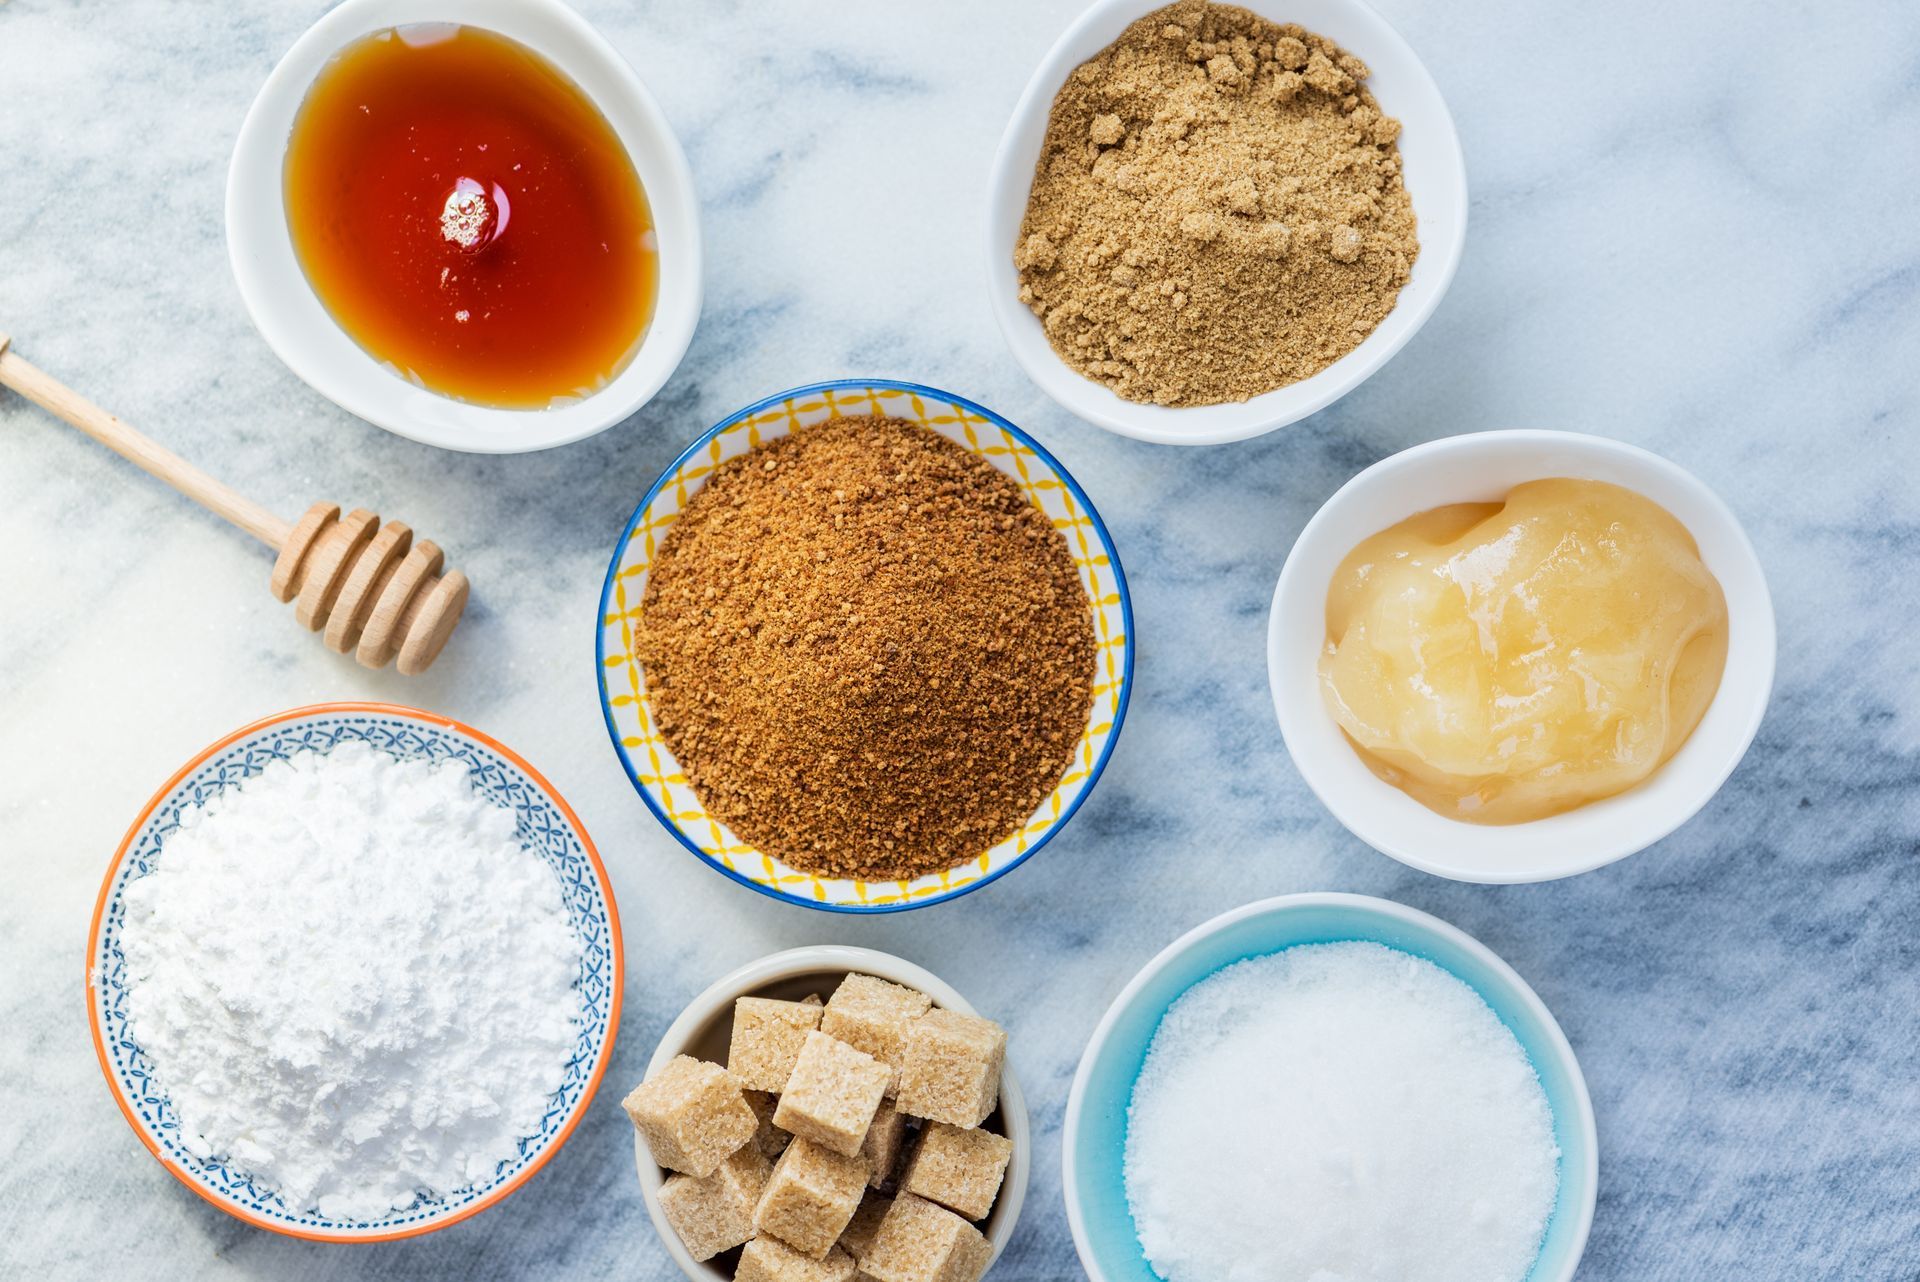 different types of sugars for baking including honey, powdered, granulated, demerara, corn syrup, etc.